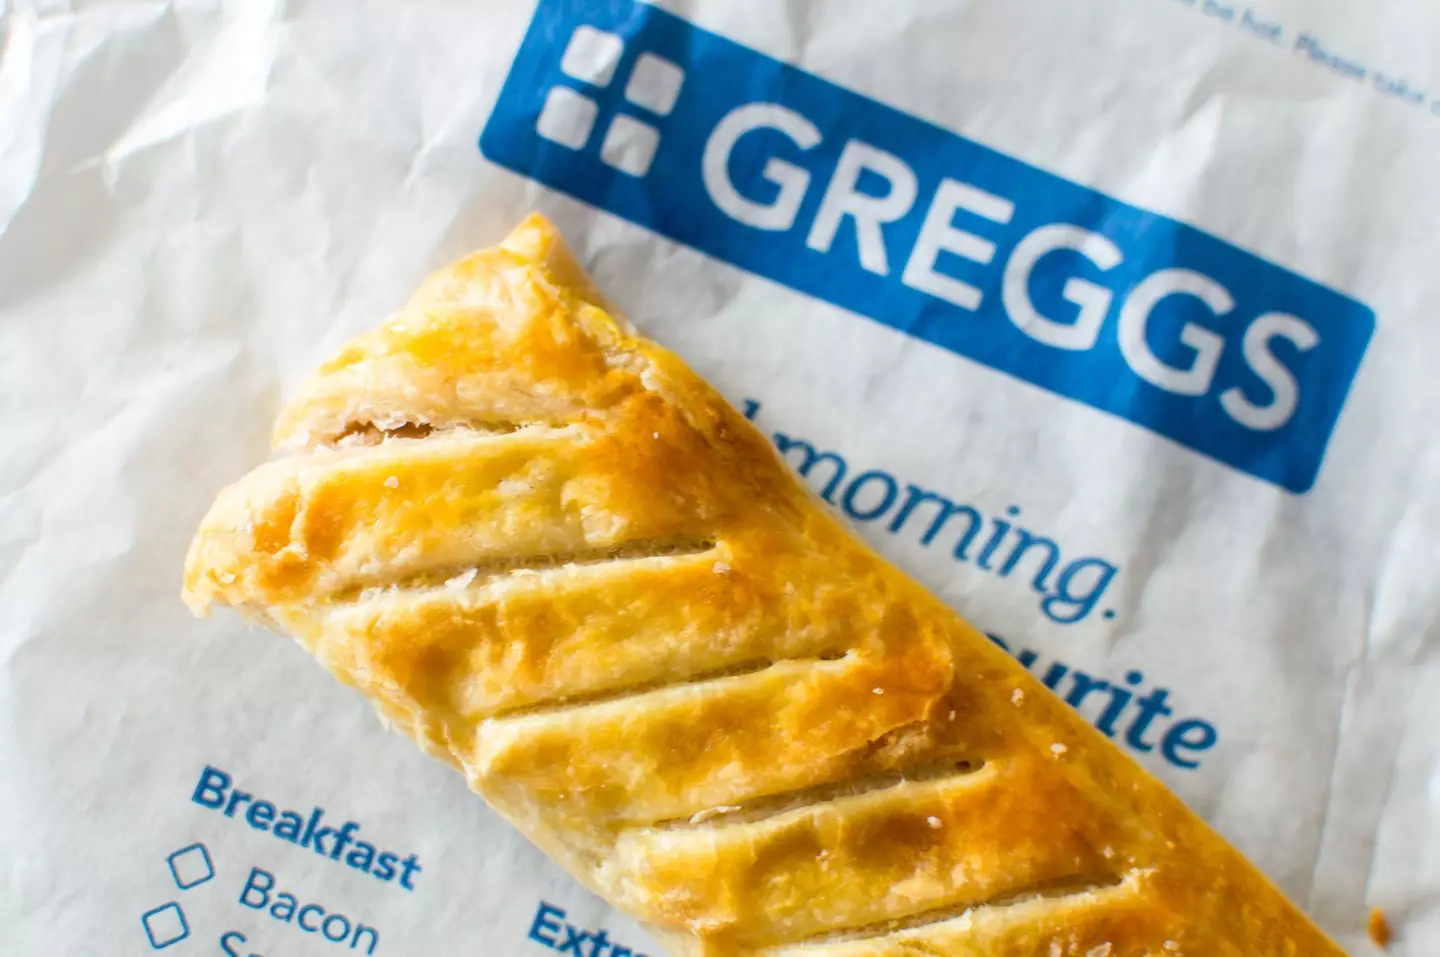 The hot food at Greggs is technically not hot food, they don't keep it warm at the counter.